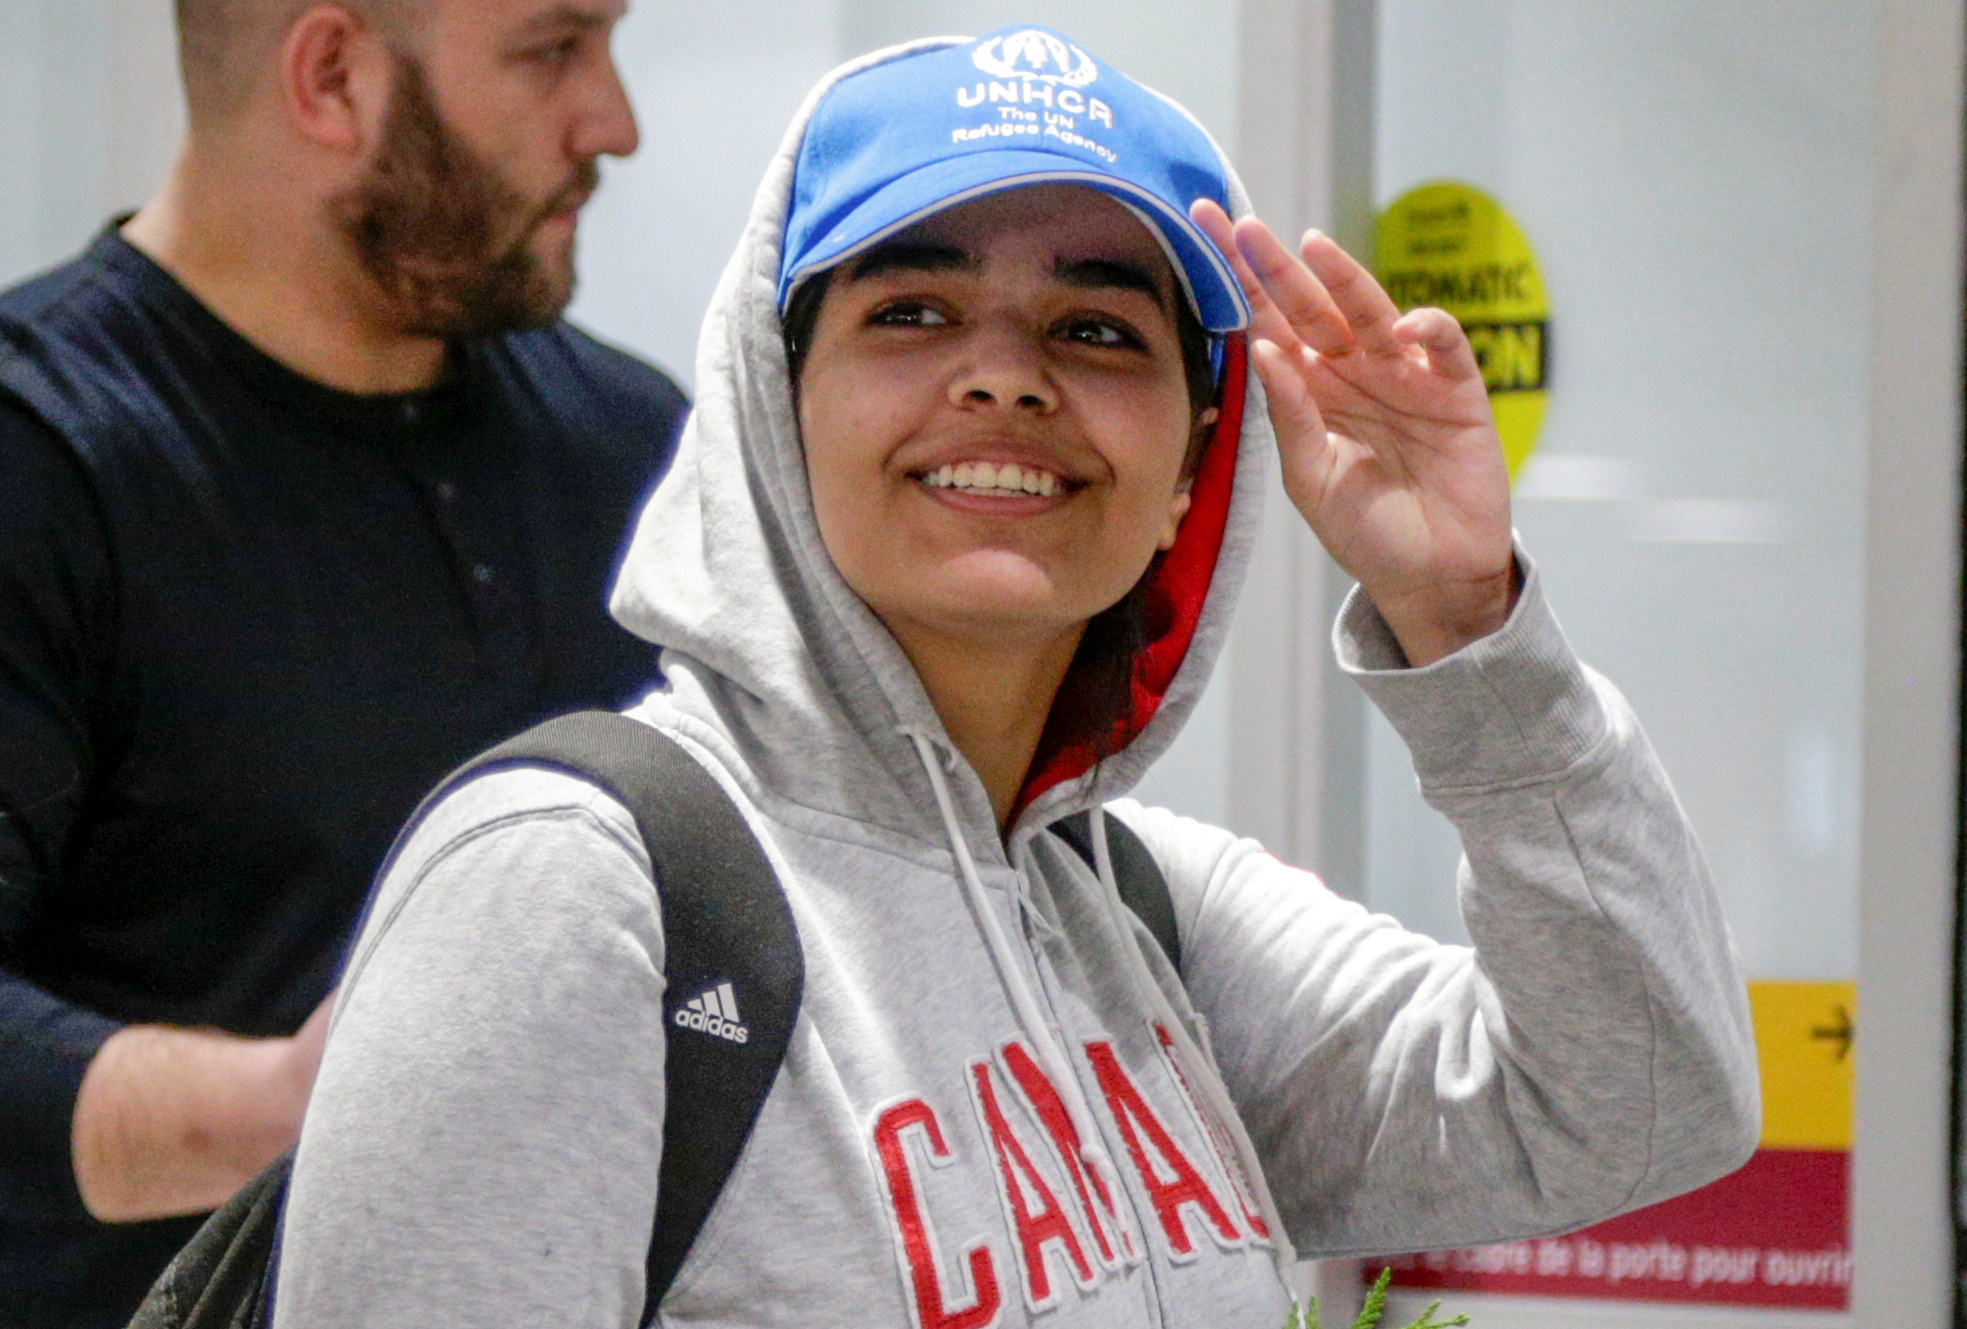 Coming to Canada 'worth the risk,' says Saudi teen refugee